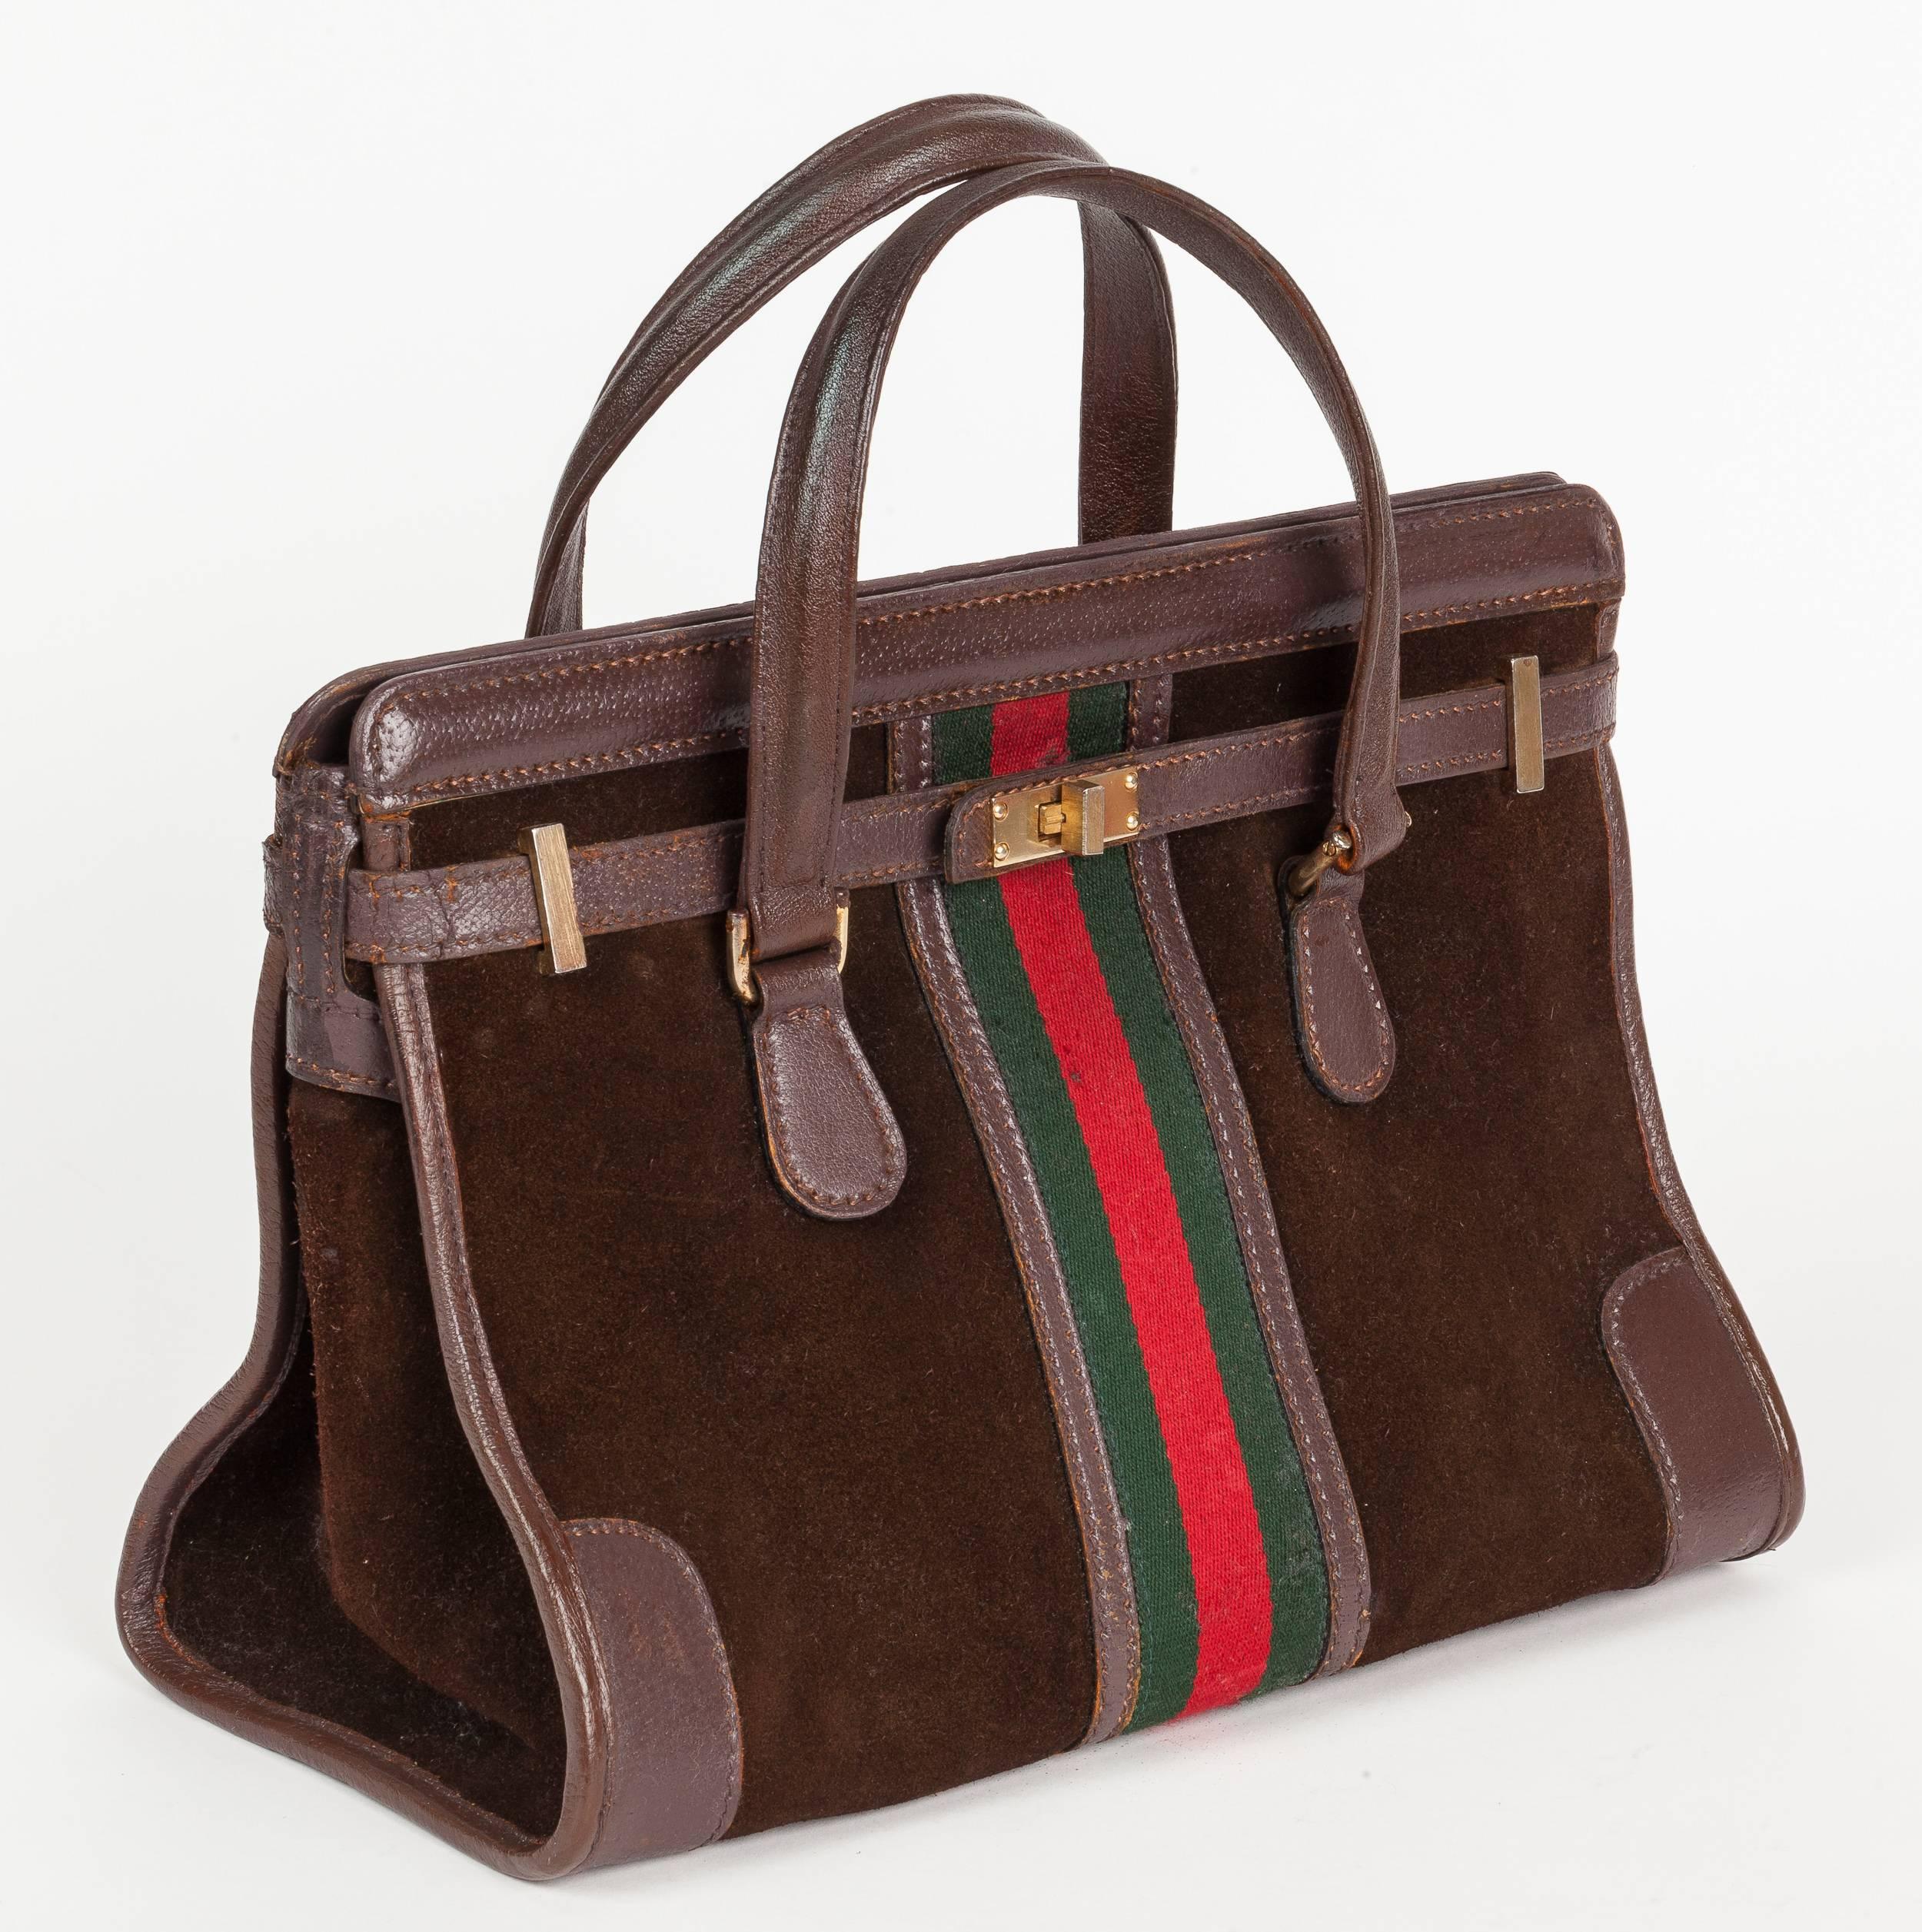 A rare 1970s Gucci brown suede open-top doctor's bag or tote with brown leather trim, gold hardware and iconic Gucci green and red canvas racer stripe detail at center back and front. Features a wraparound brown leather strap, brass turnlock closure